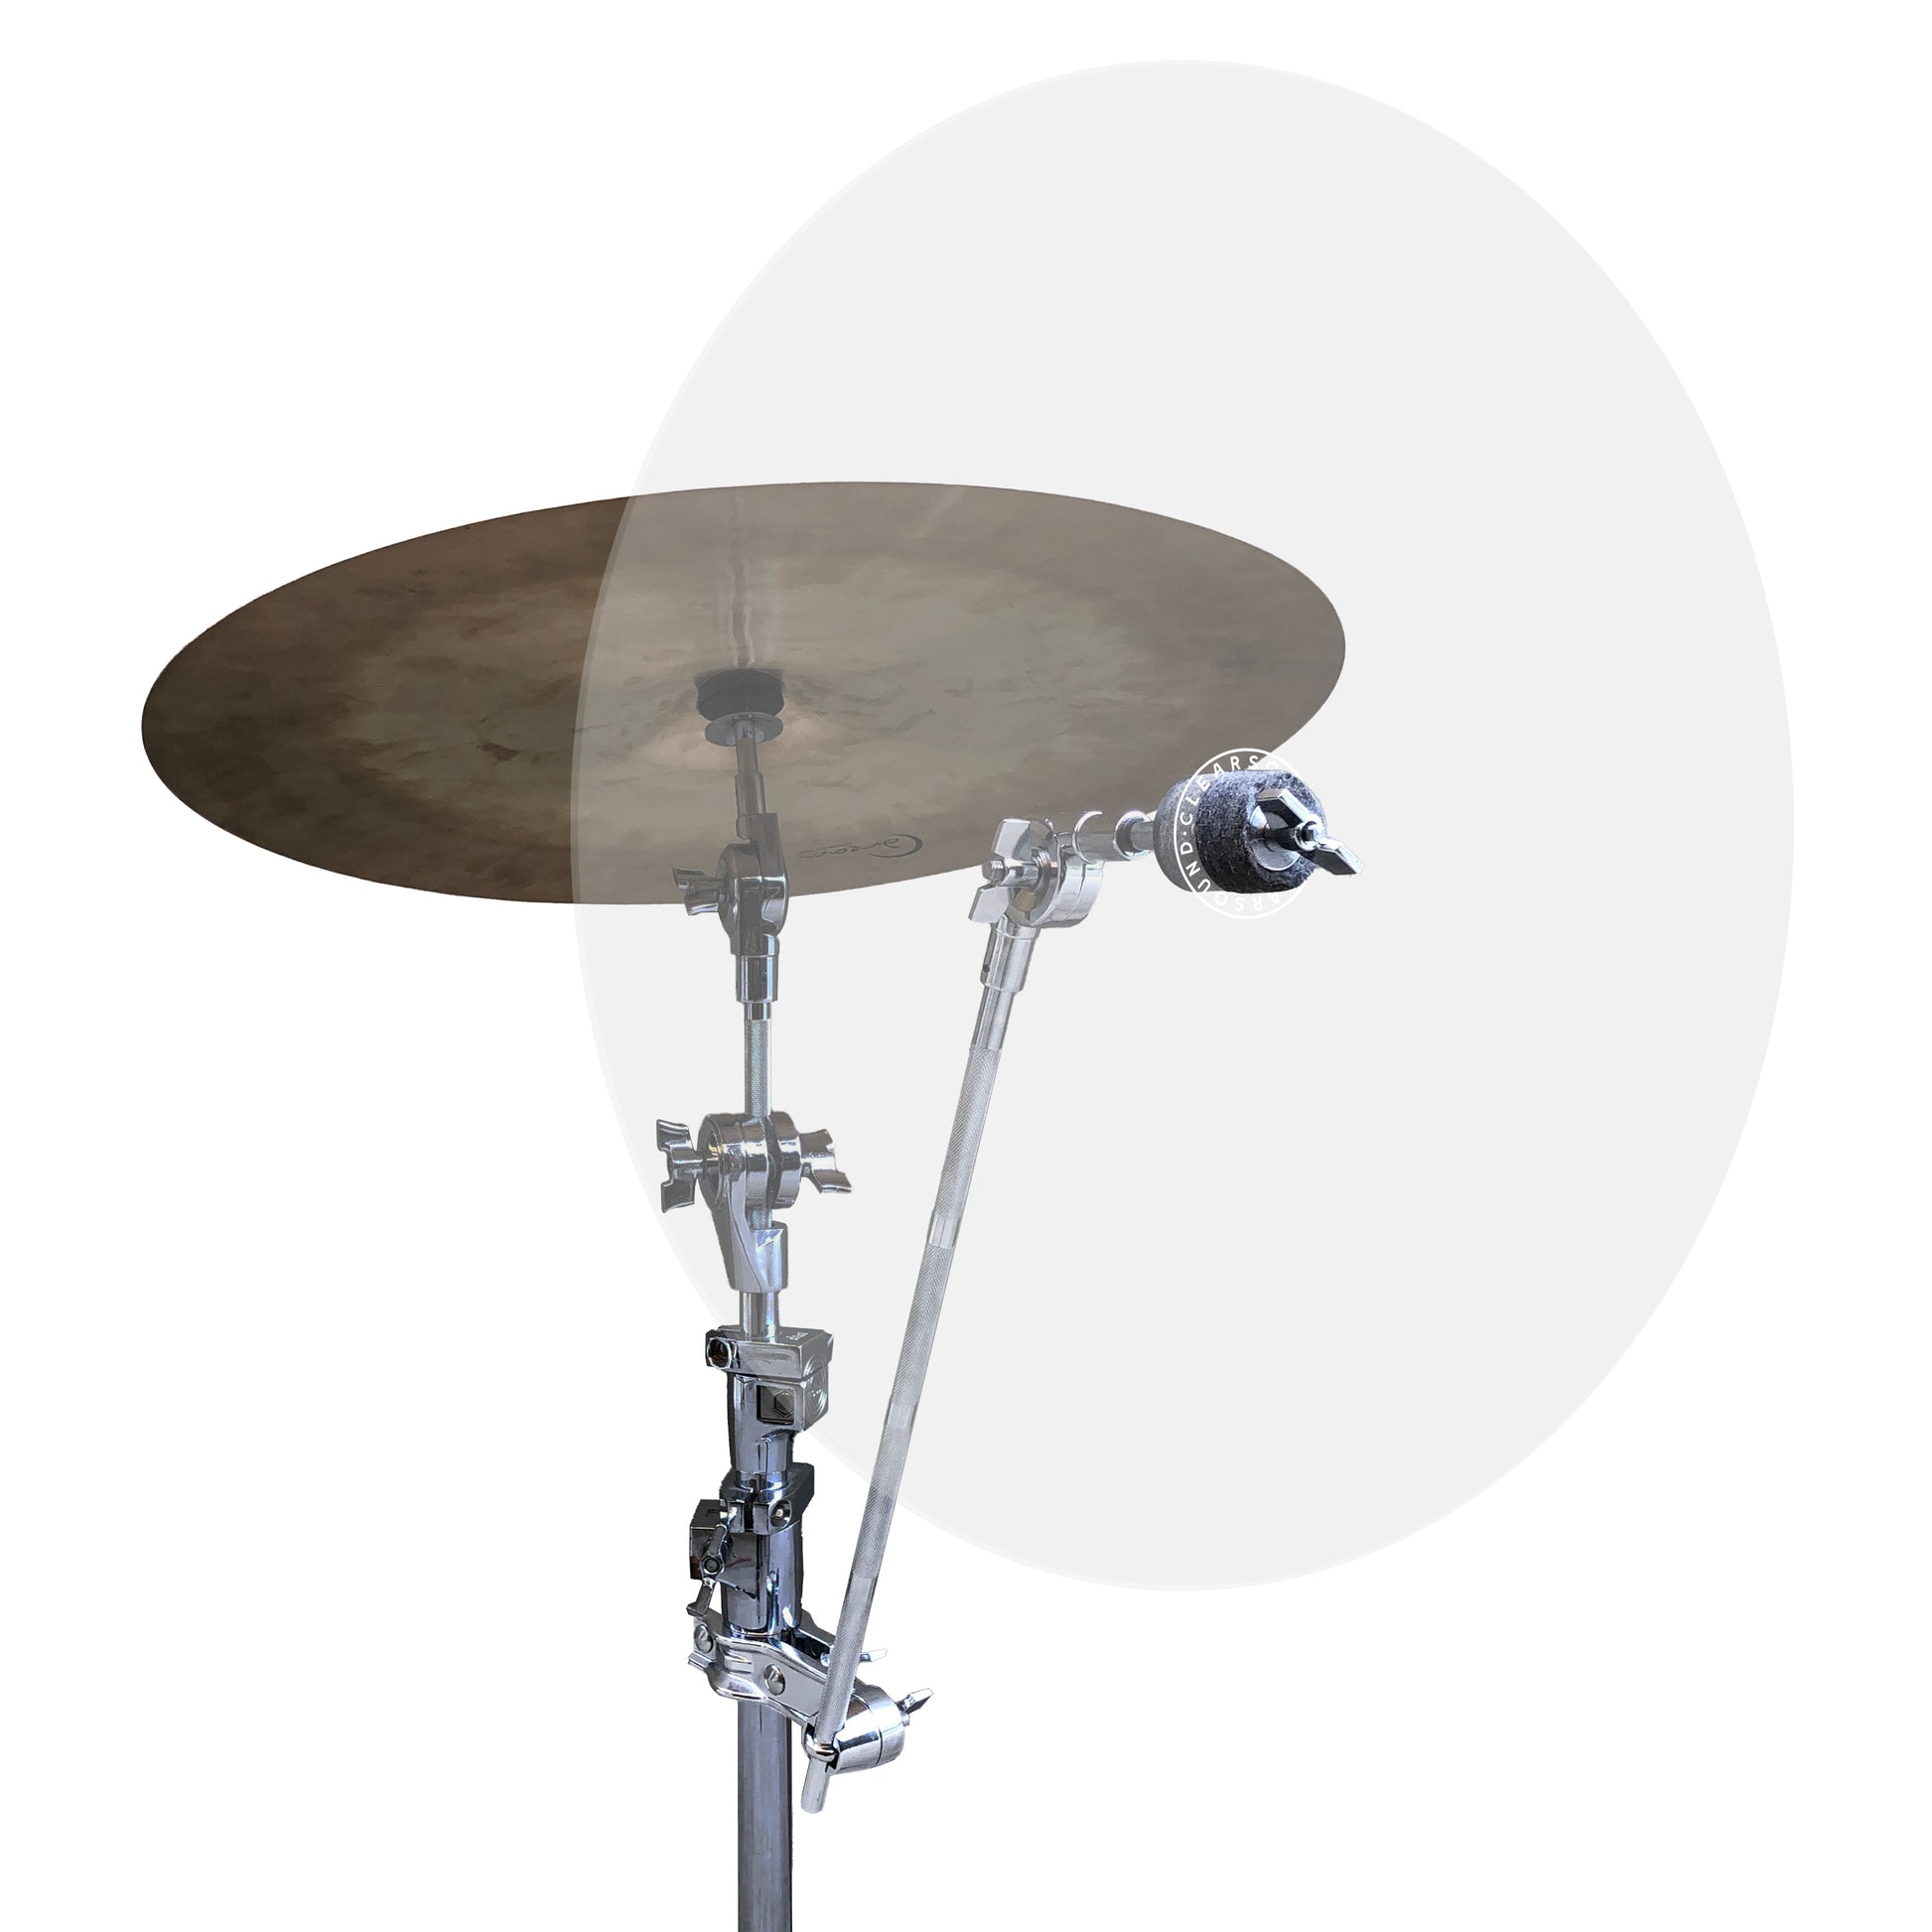 Cymbal Baffle Arm Mount. Cymbal Baffles and Stands, Shy Baffles and Sets.